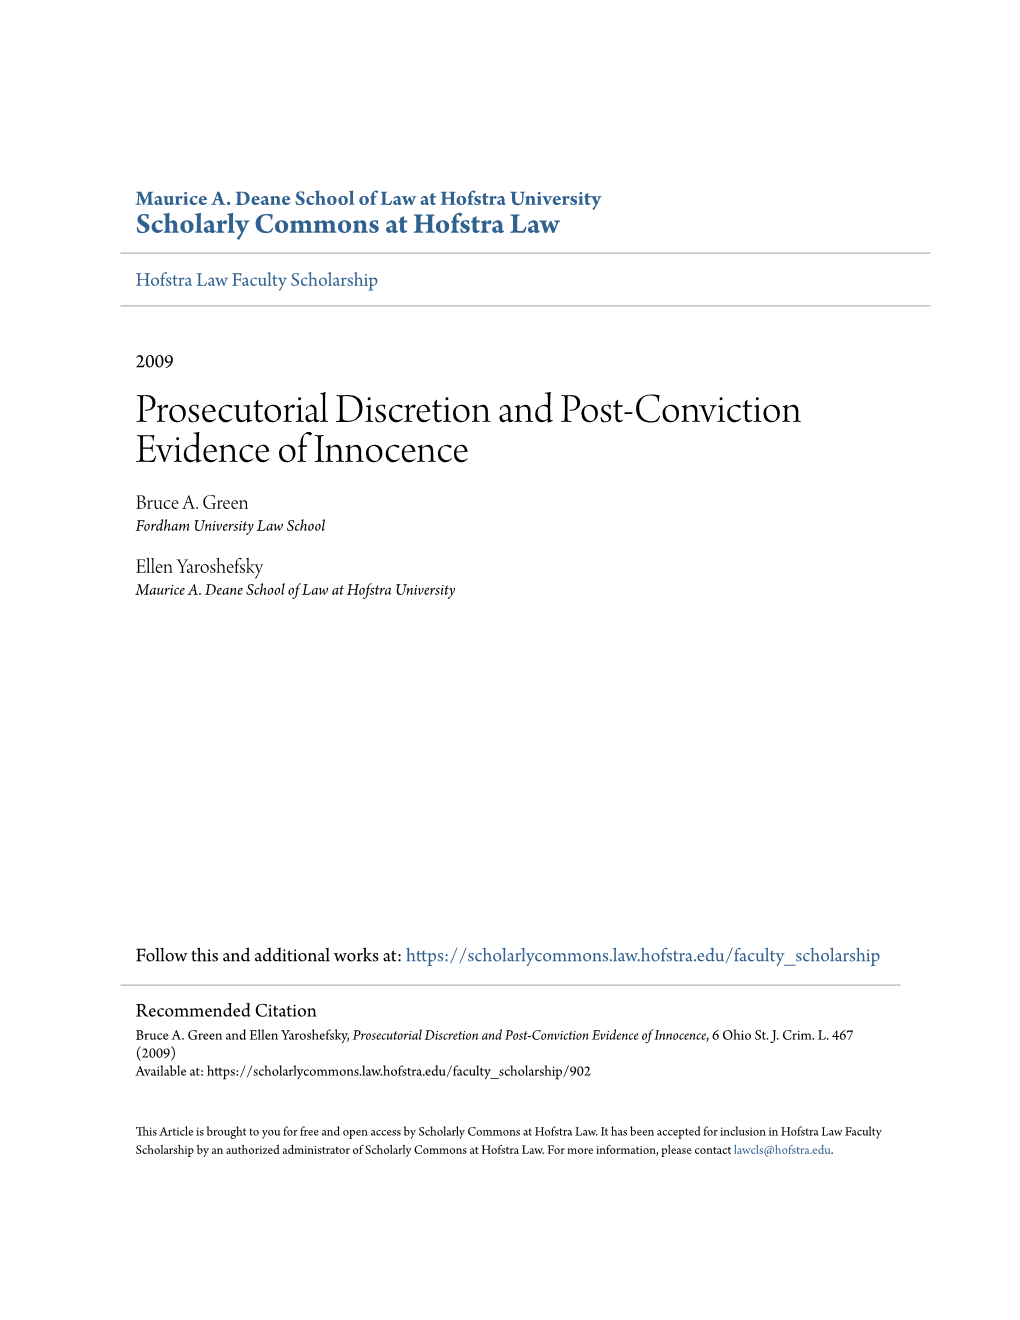 Prosecutorial Discretion and Post-Conviction Evidence of Innocence Bruce A